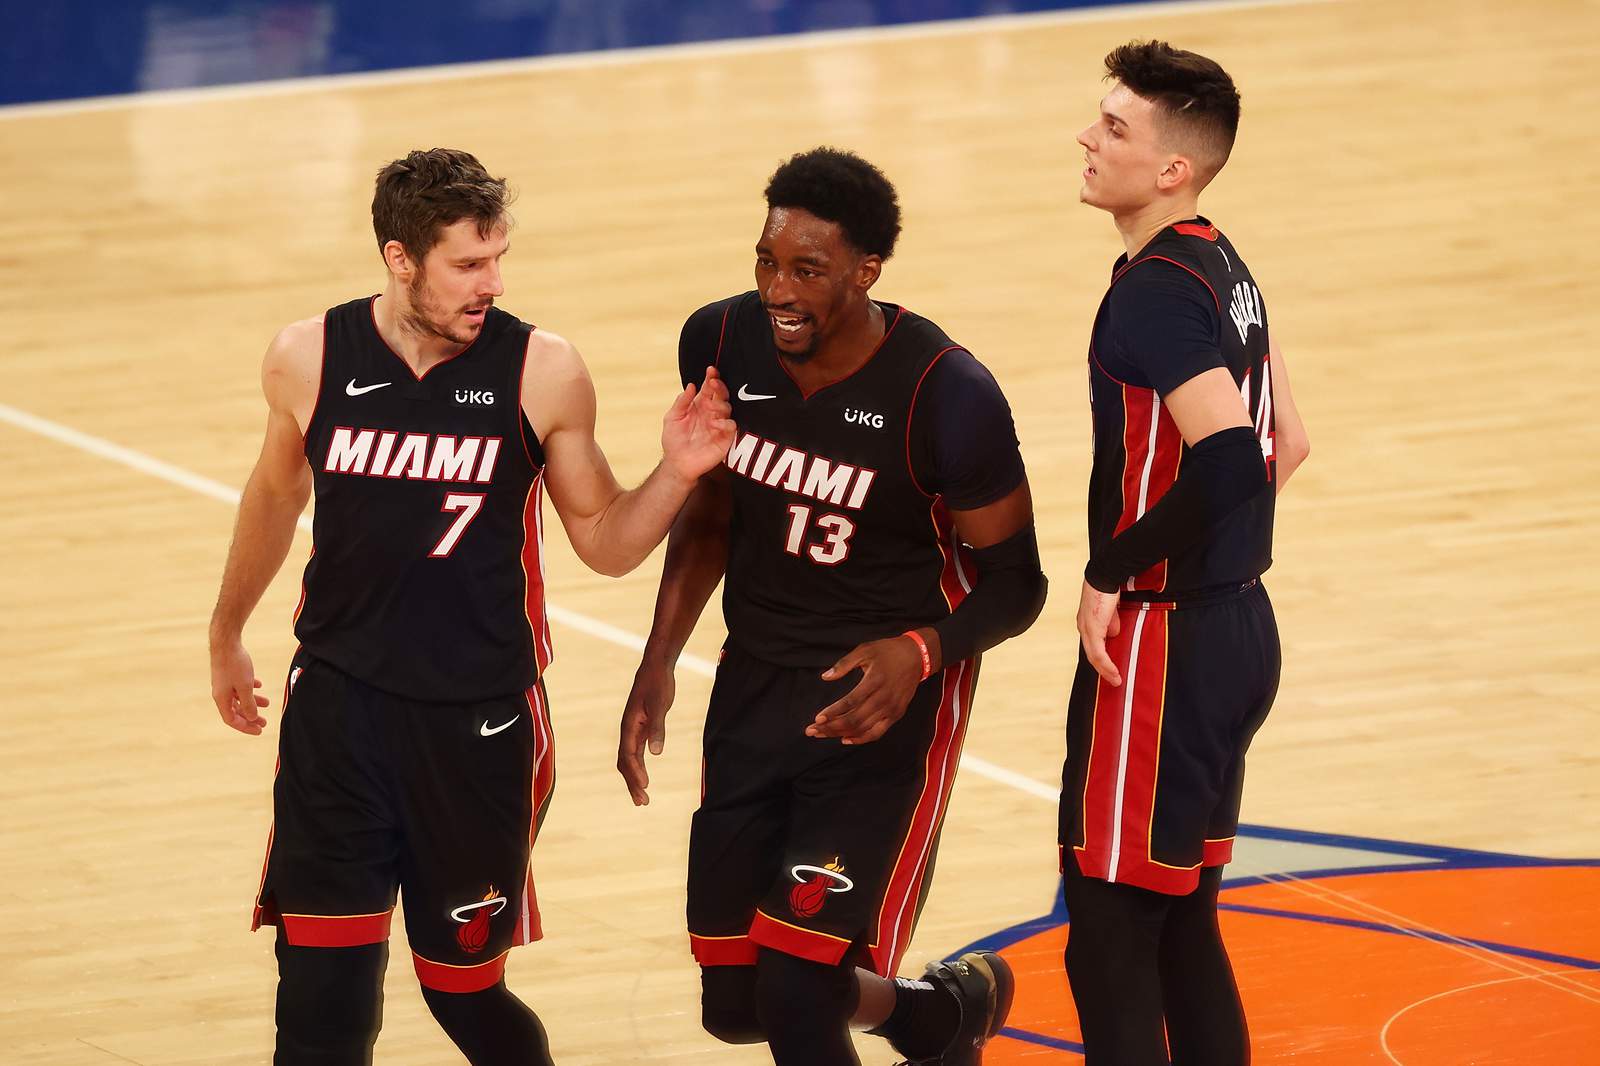 Heat snap a 6-game losing streak with 98-88 win over Knicks